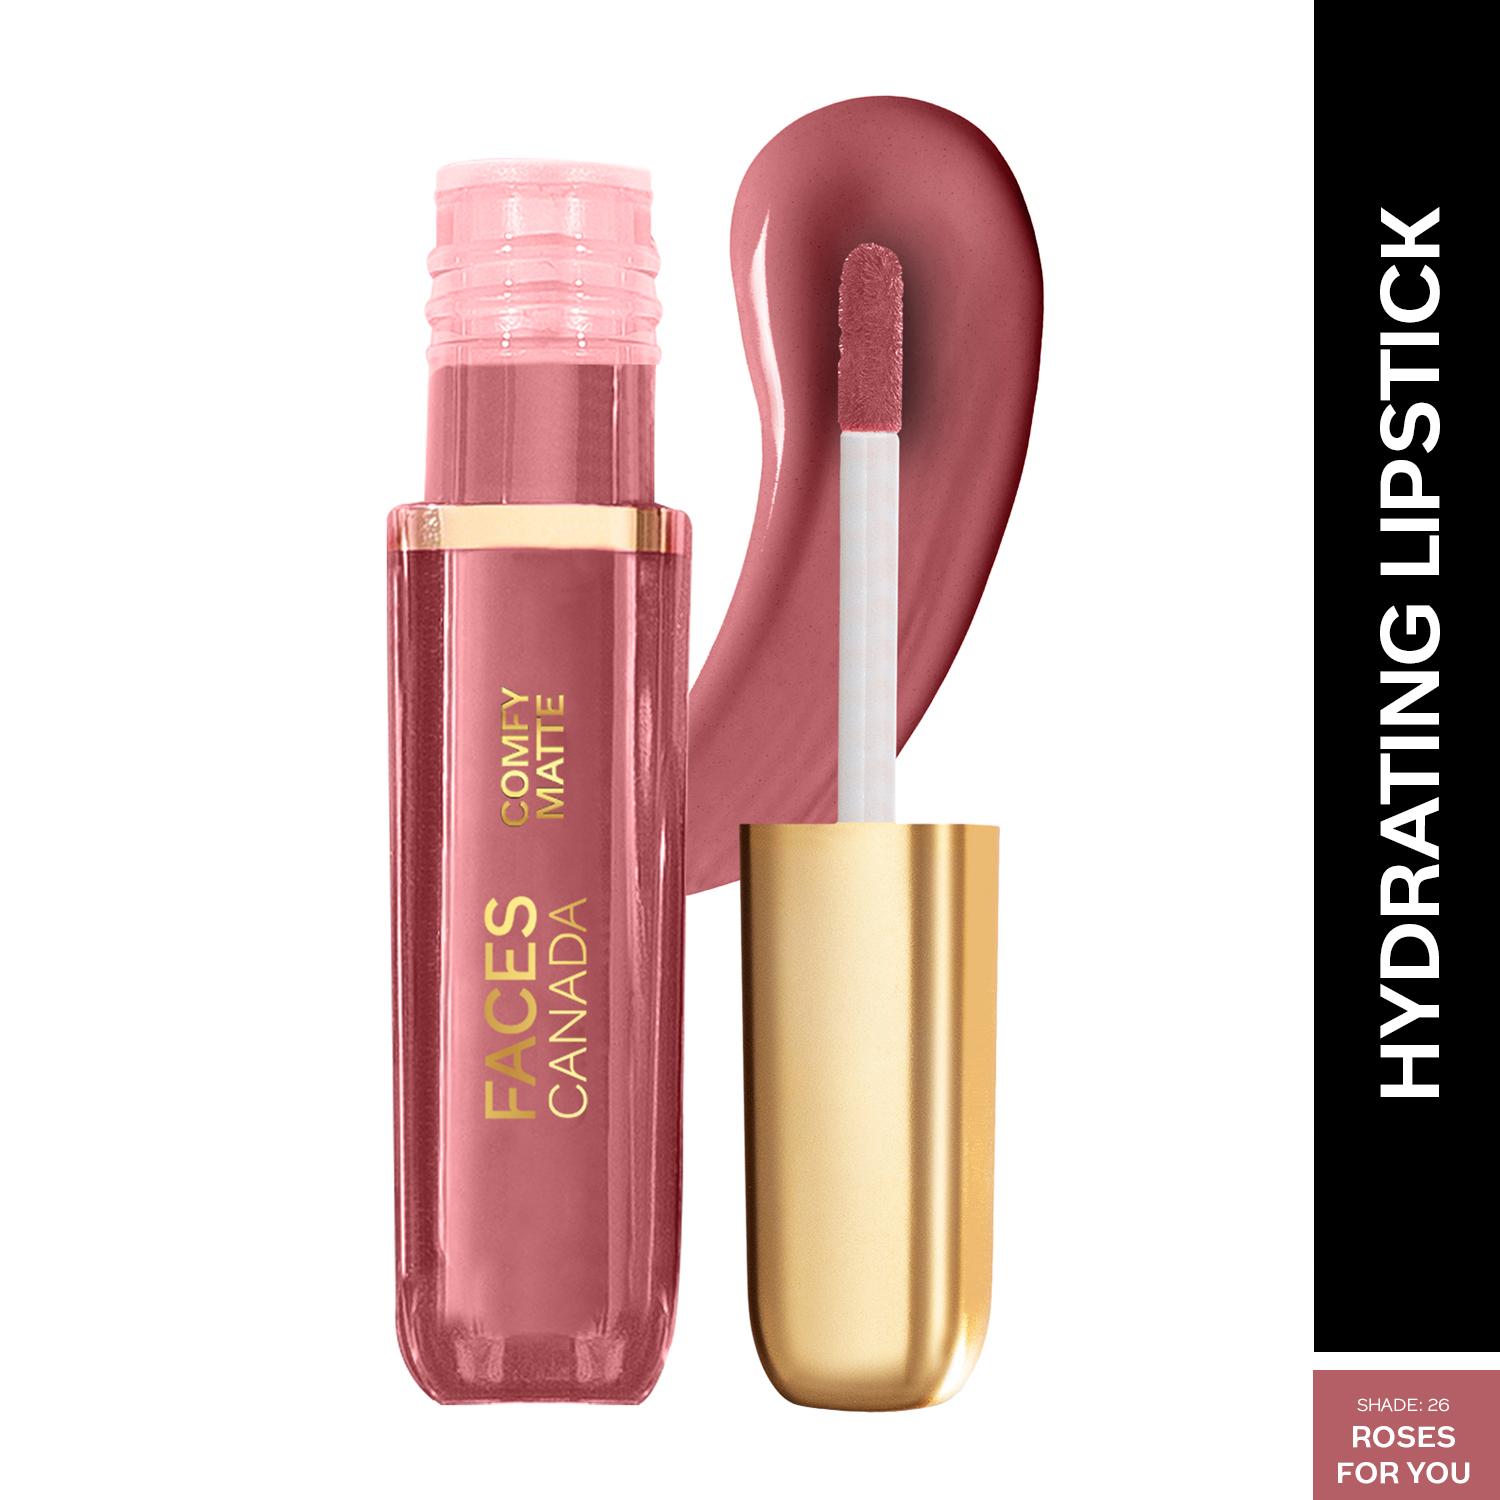 Faces Canada | Faces Canada Comfy Matte Liquid Lipstick, 10HR Stay, No Dryness - Roses For You 26 (3 ml)